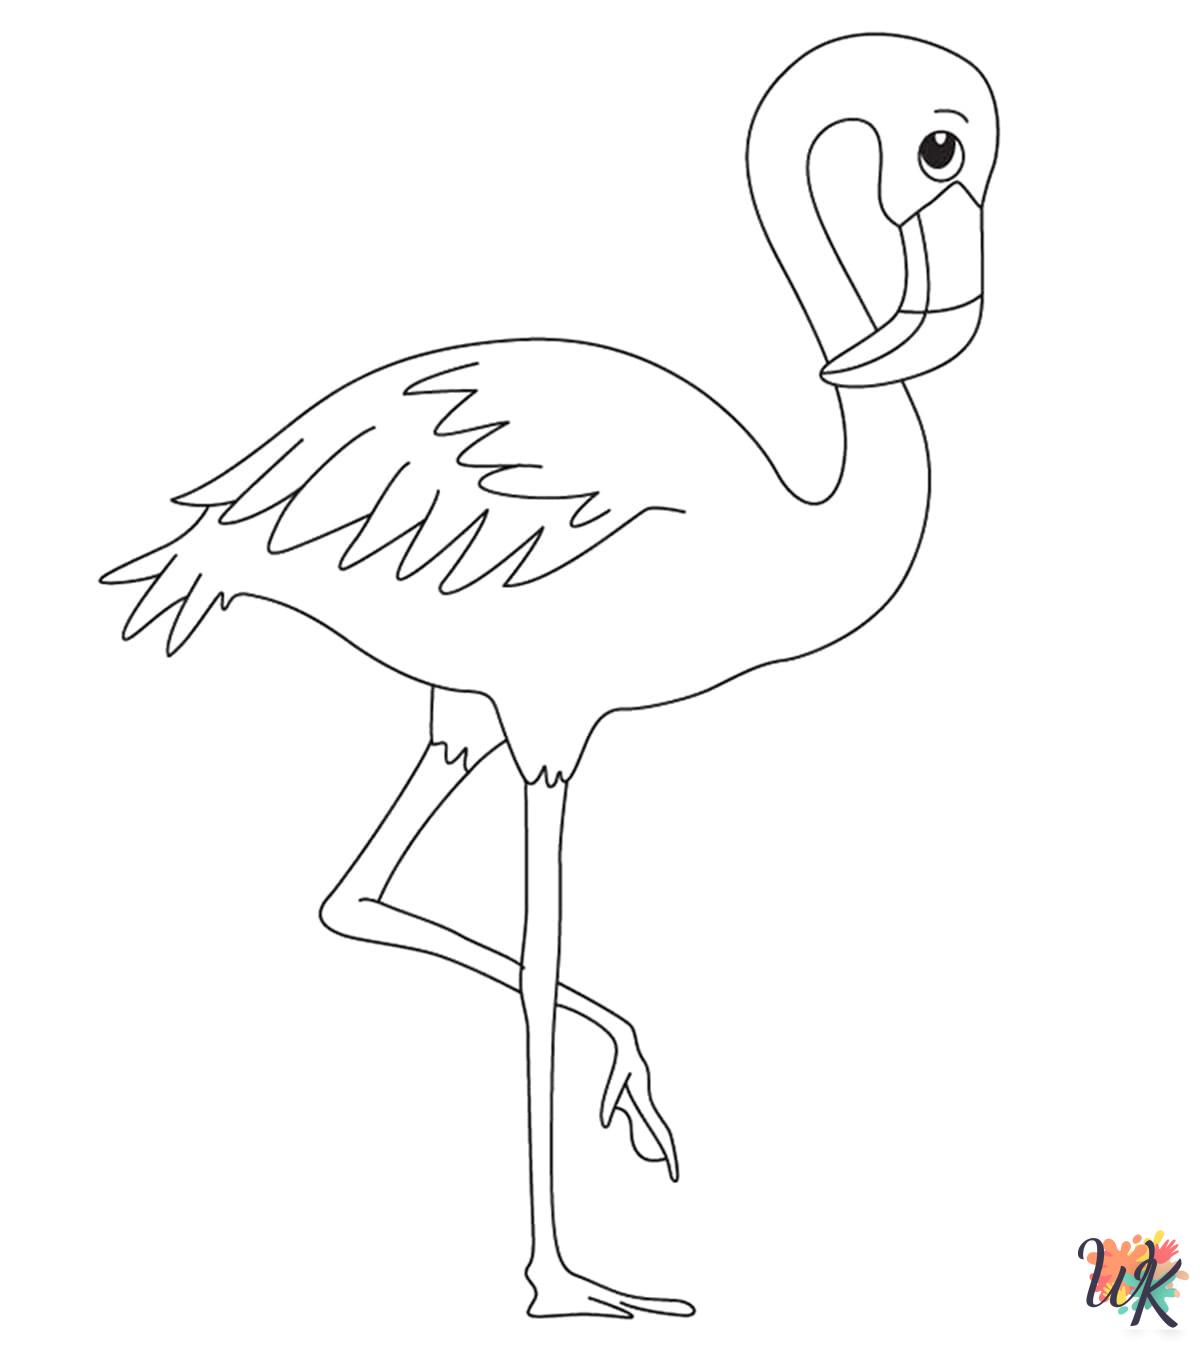 Flamingo coloring pages for preschoolers